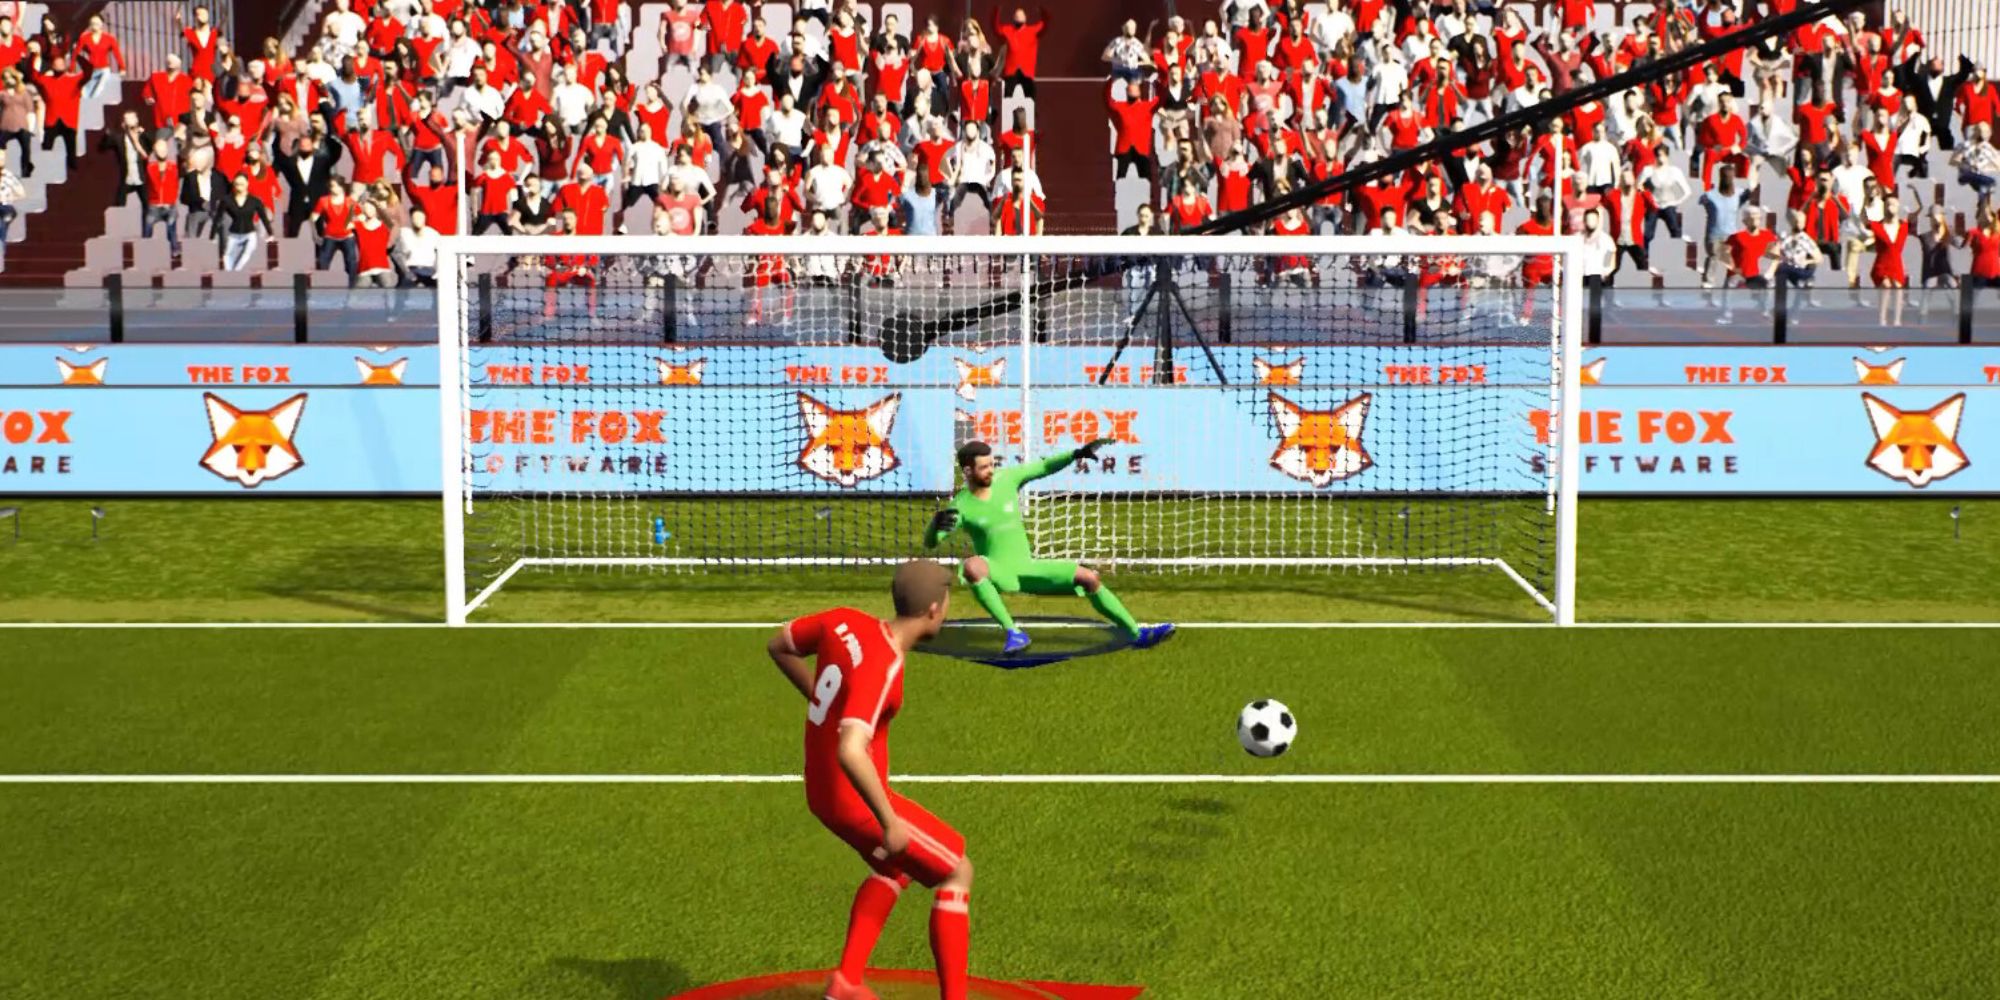 Soccer player shoots the ball toward the gate defended by a sliding goalkeeper